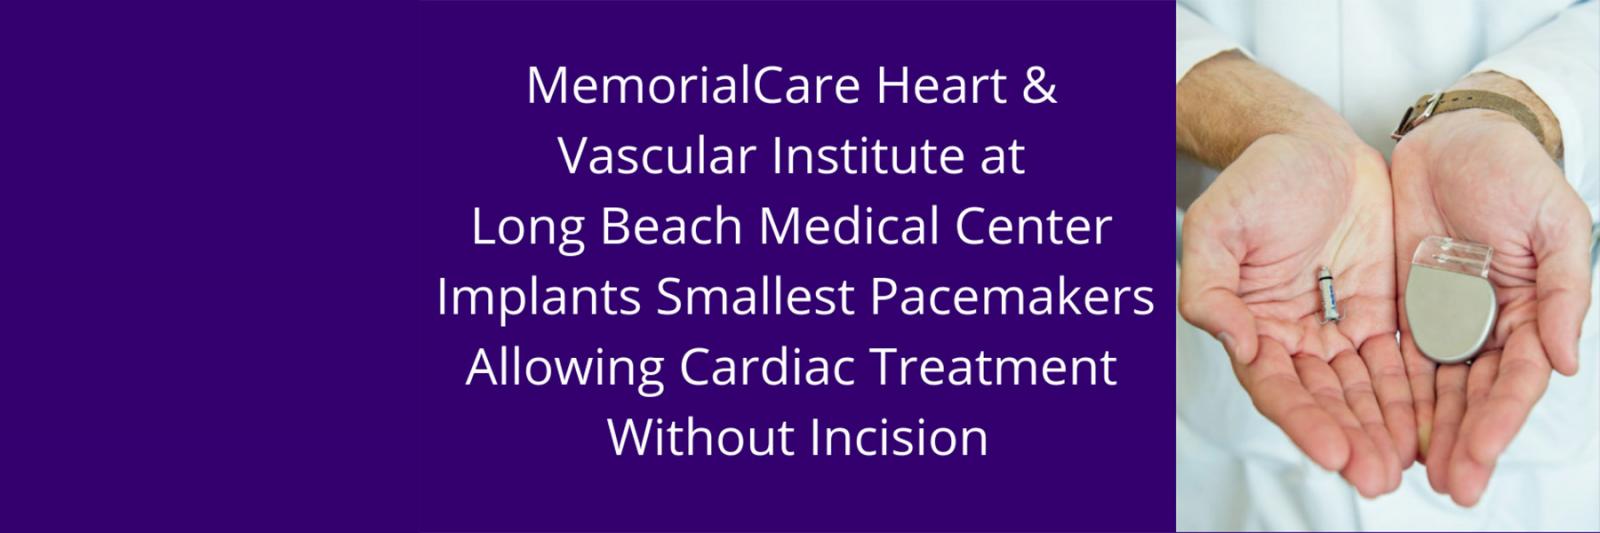 Image of a pacemaker with text that says, MemorialCare Heart and Vascular Institute at Long Beach Medical Center implants smallest pacemakers allowing cardiac treatment without incision.